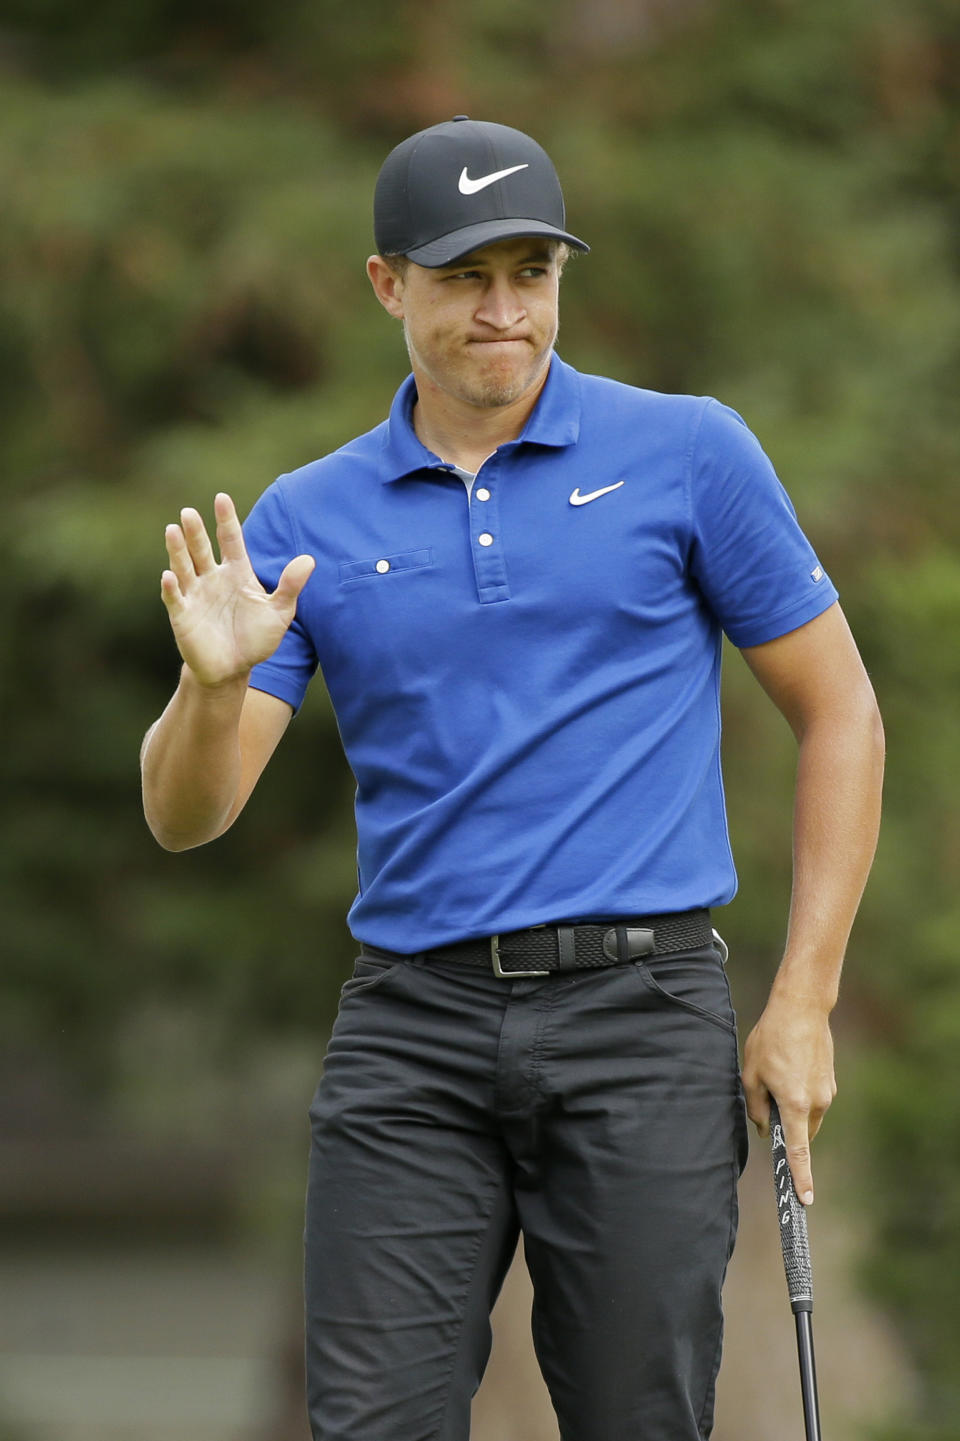 Cameron Champ waves after making a birdie putt on the sixth green of the Silverado Resort North Course during the final round of the Safeway Open PGA golf tournament Sunday, Sept. 29, 2019, in Napa, Calif. (AP Photo/Eric Risberg)